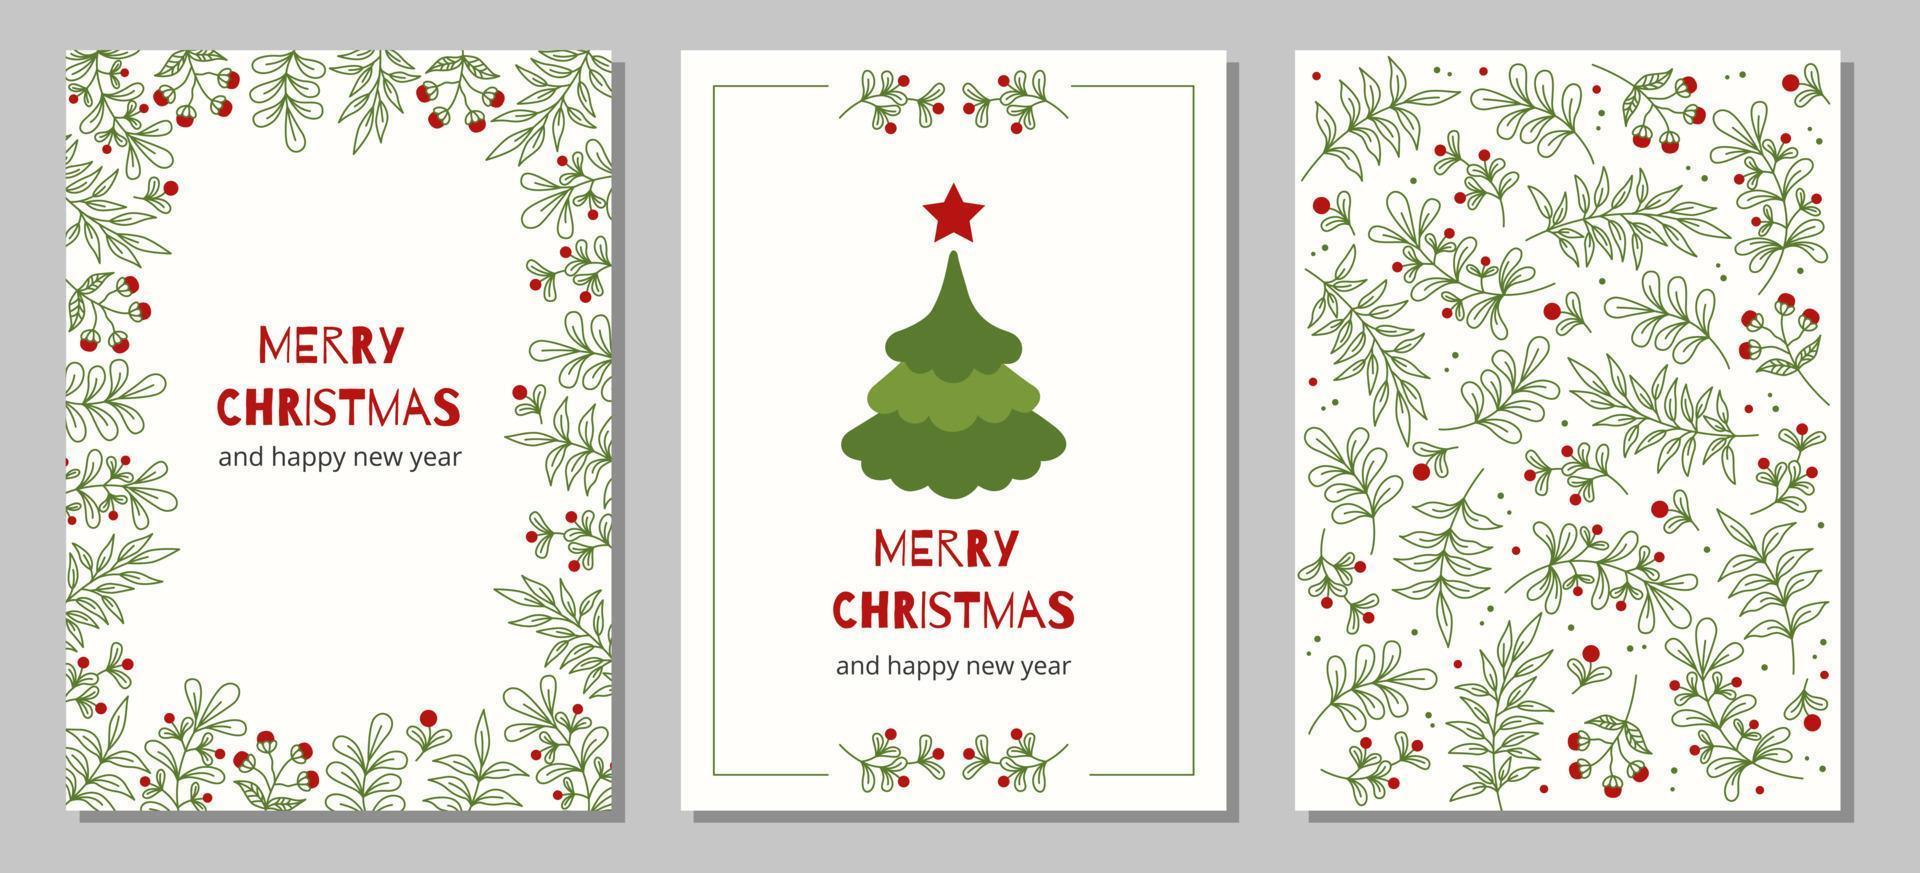 Set of christmas and happy new year greeting cards with Christmas tree, floral frames and backgrounds. vector